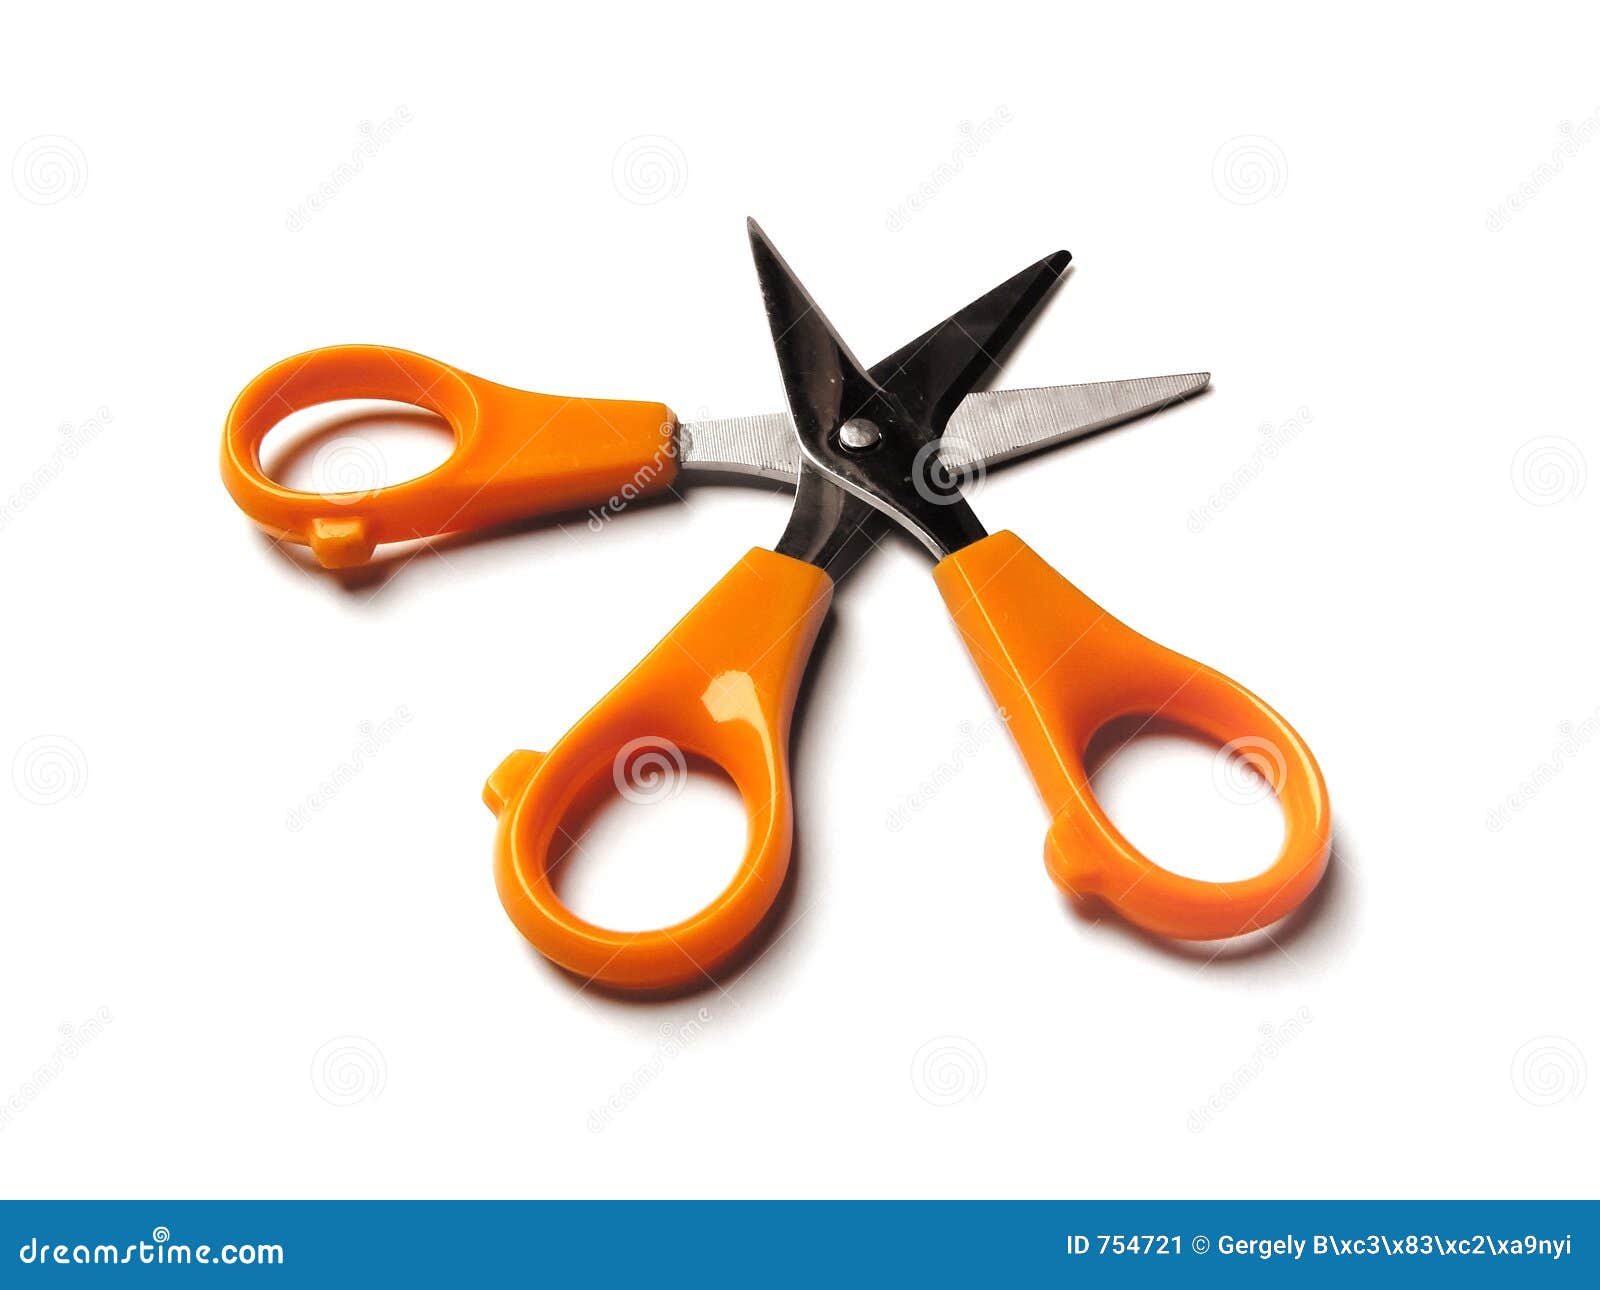 Fashion and Functionality As Fancy Scissors Take Center Stage on a